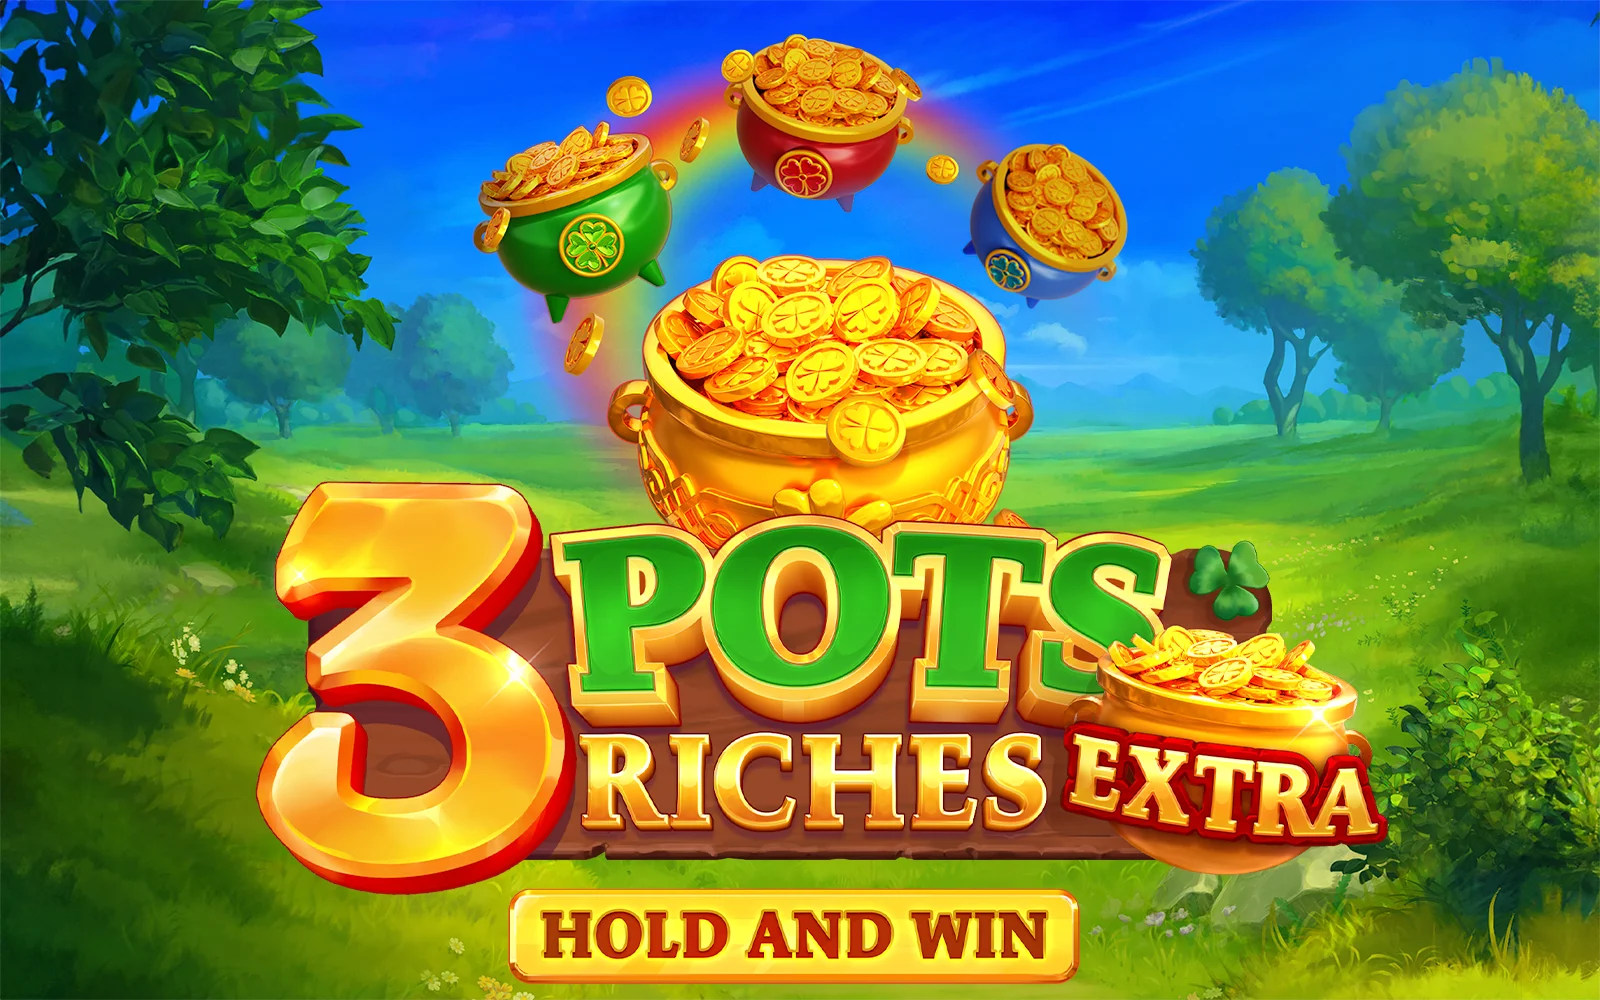 Jogue 3 Pots Riches Extra: Hold and Win no casino online Starcasino.be 